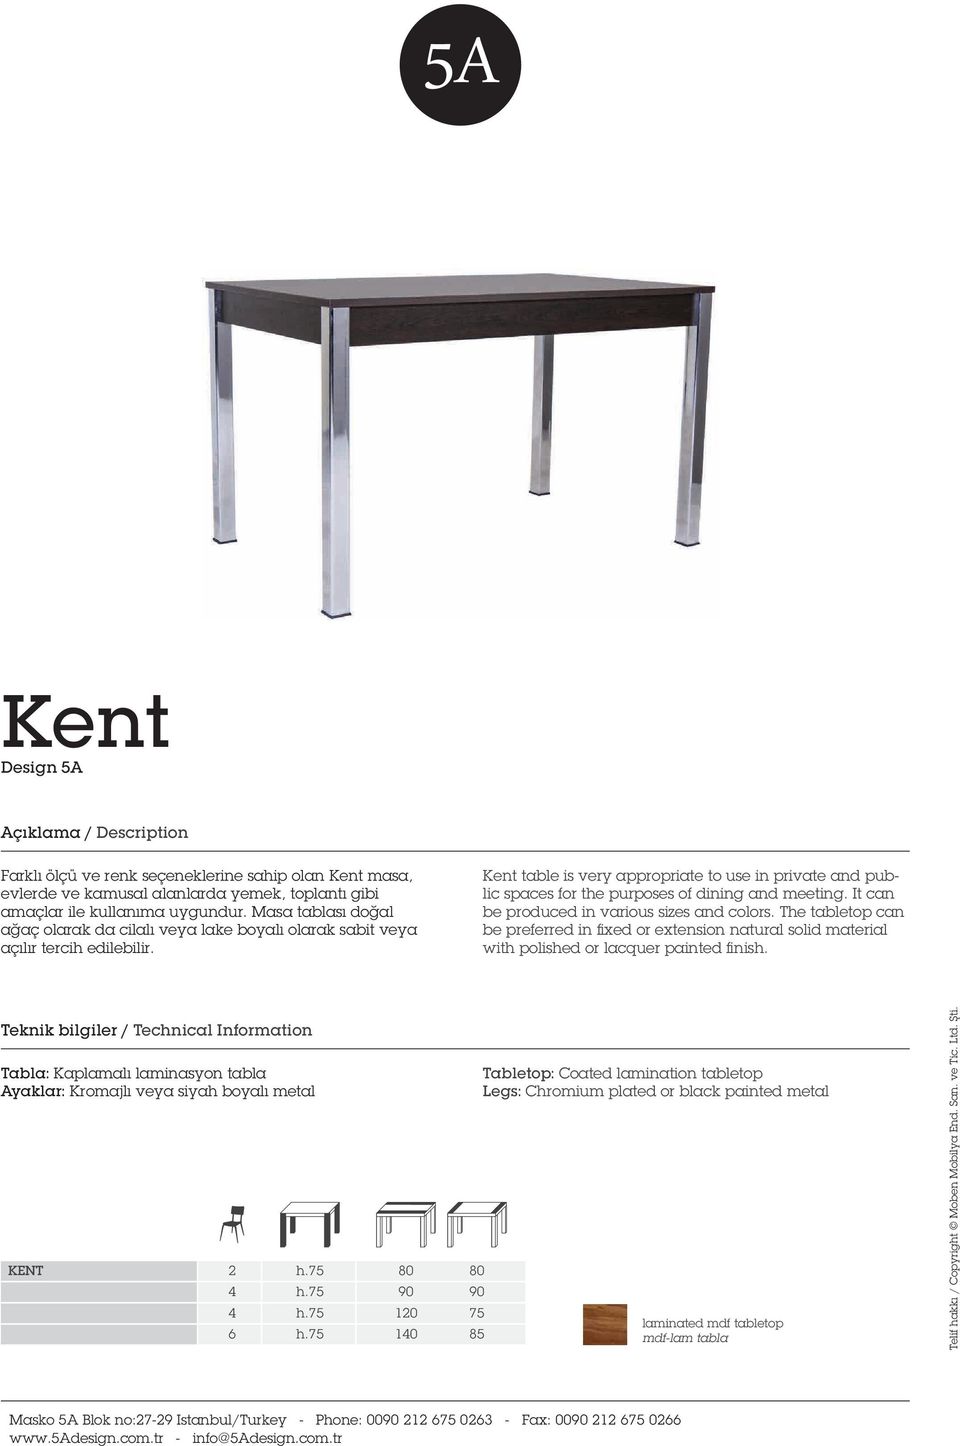 Kent table is very appropriate to use in private and public spaces for the purposes of dining and meeting. It can be produced in various sizes and colors.